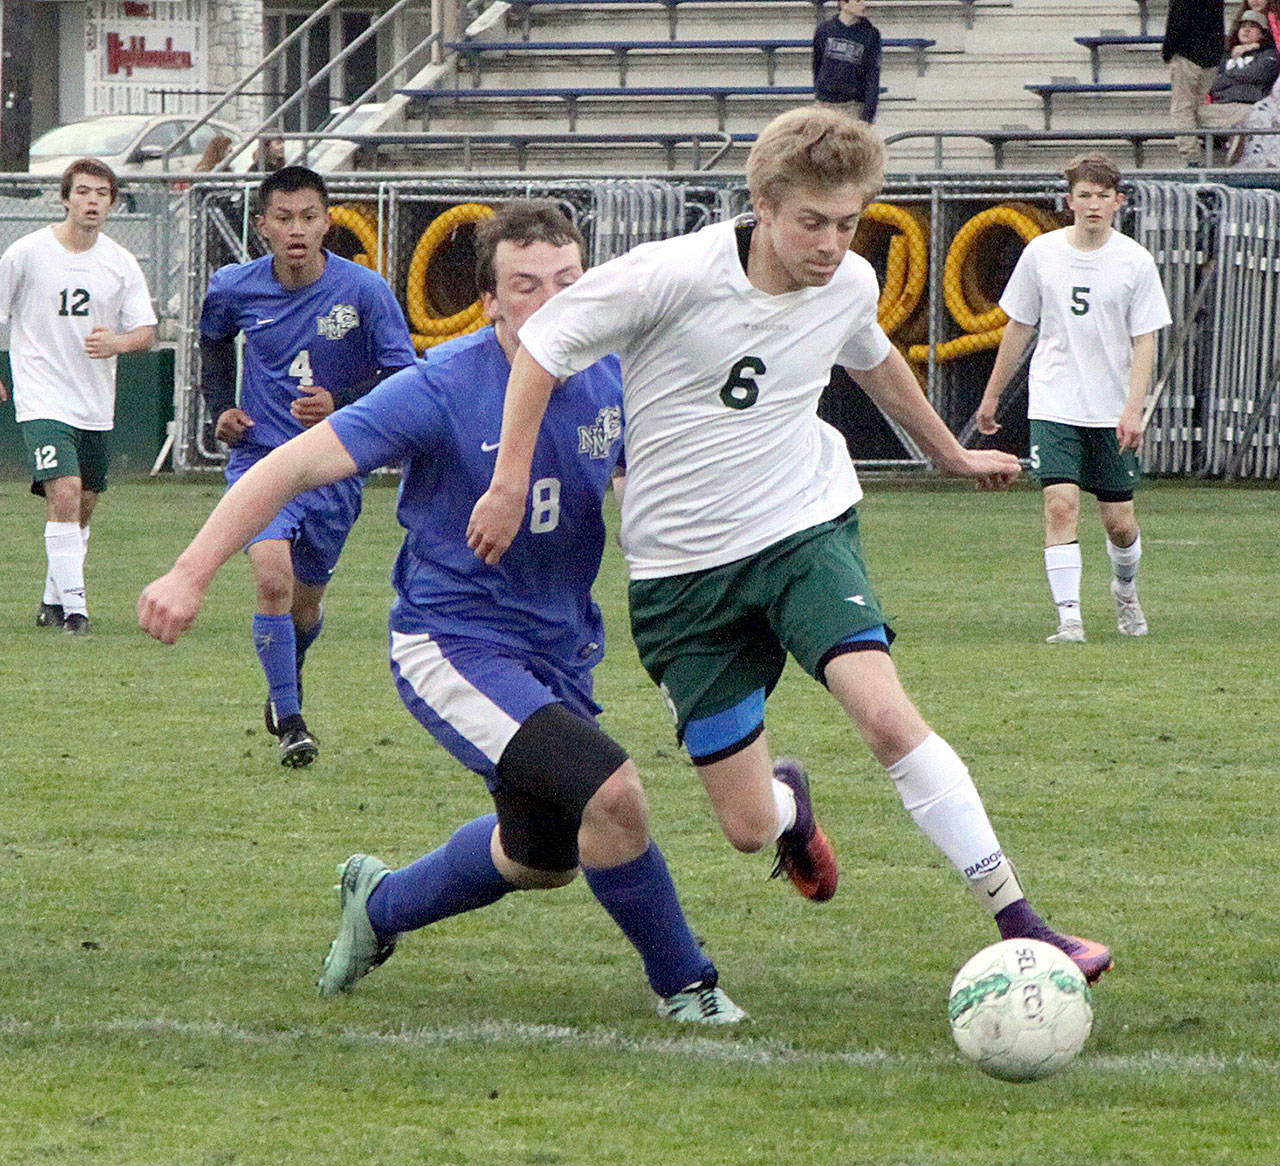 Port Angeles’ Ben Schneider dribbles past a North Mason player. Schneider has been selected as the All-Peninsula Boys Soccer MVP.                                Keith Thorpe/Peninsula Daily News